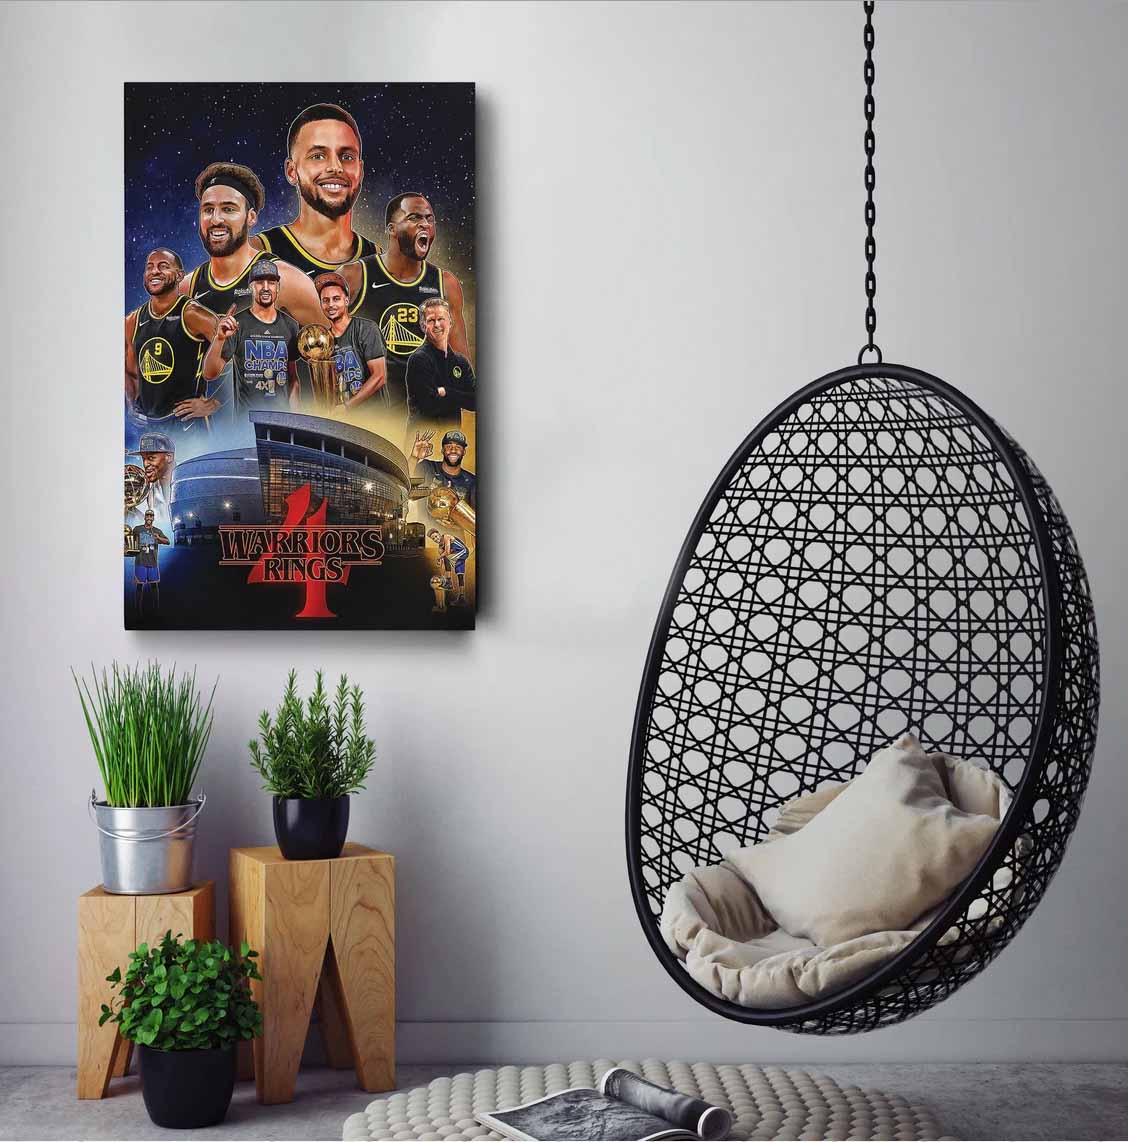 Golden State Warriors 4 Ring NBA Champions Poster